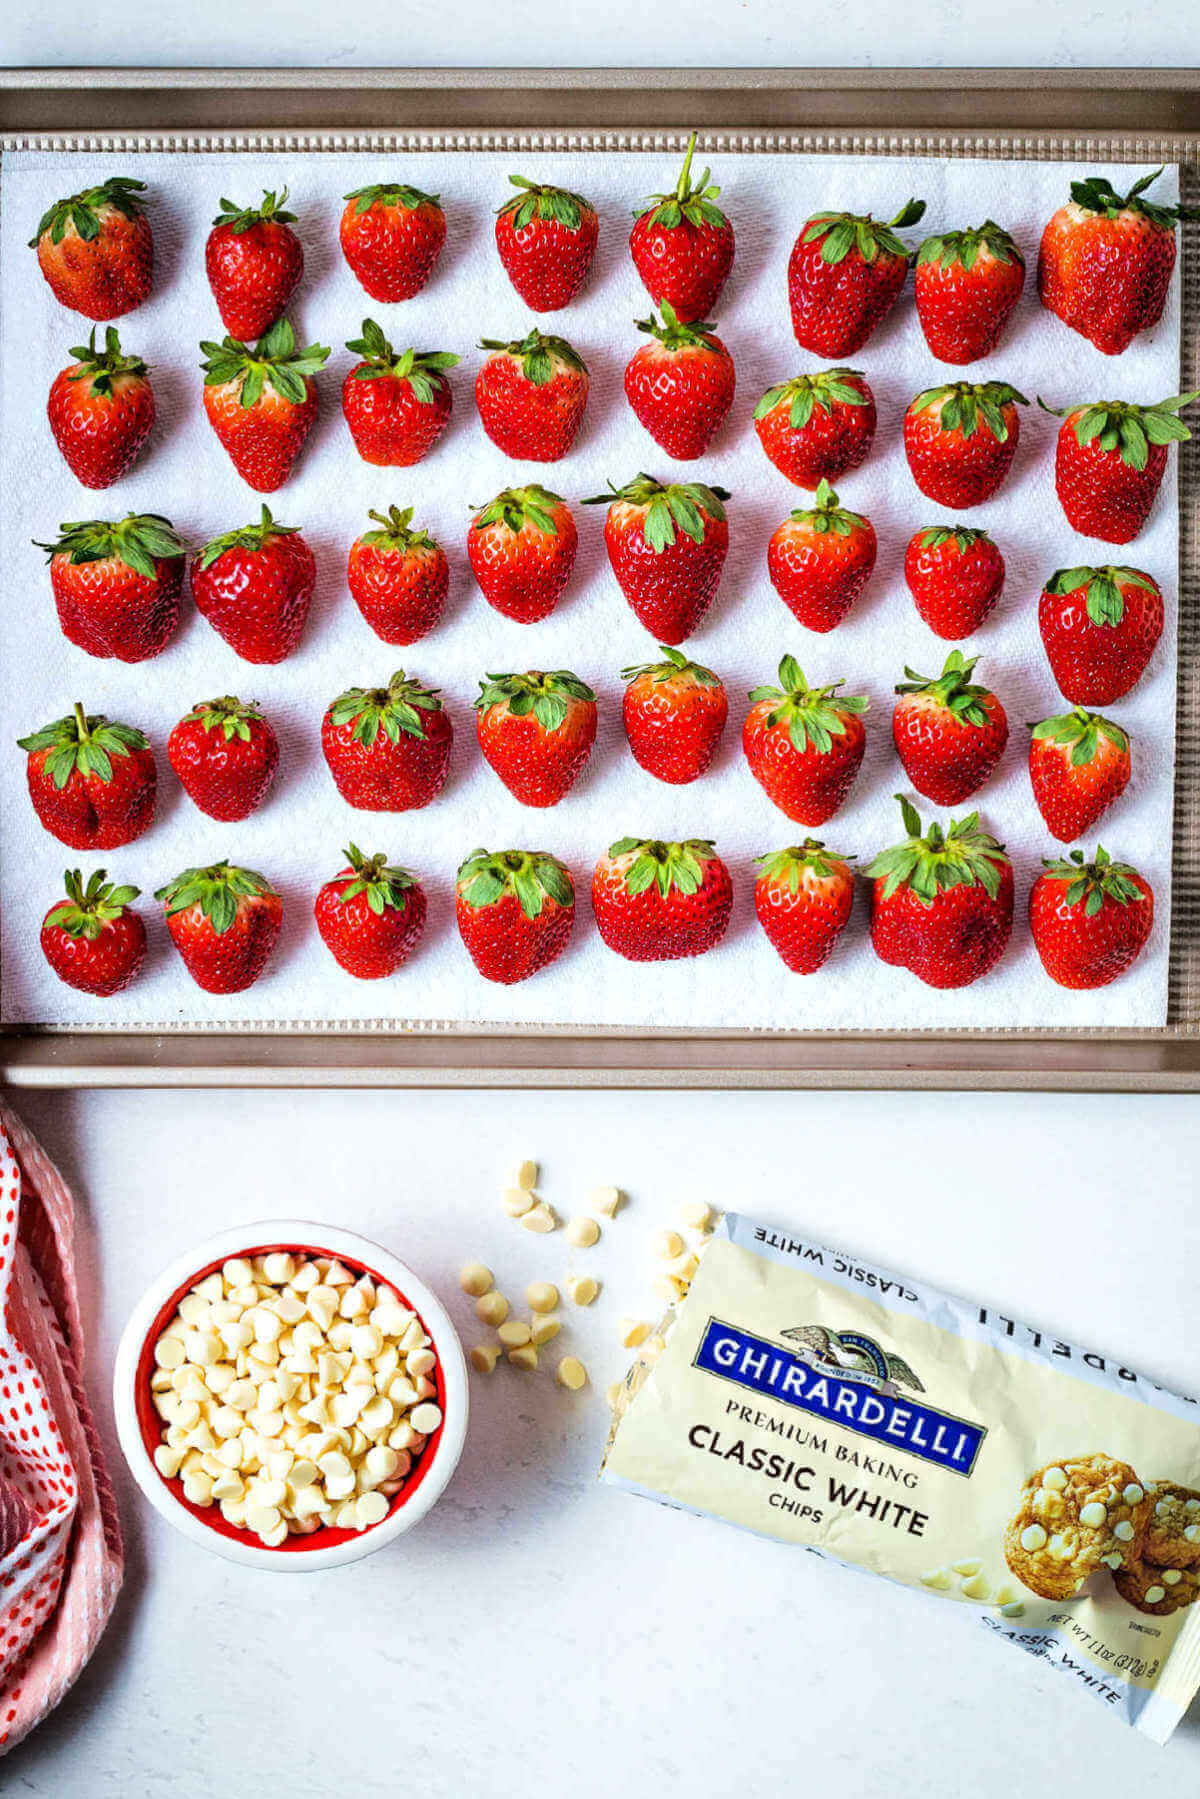 fresh strawberries drying on a paper towel lined baking sheet with a bag of white chocolate chips on the counter.